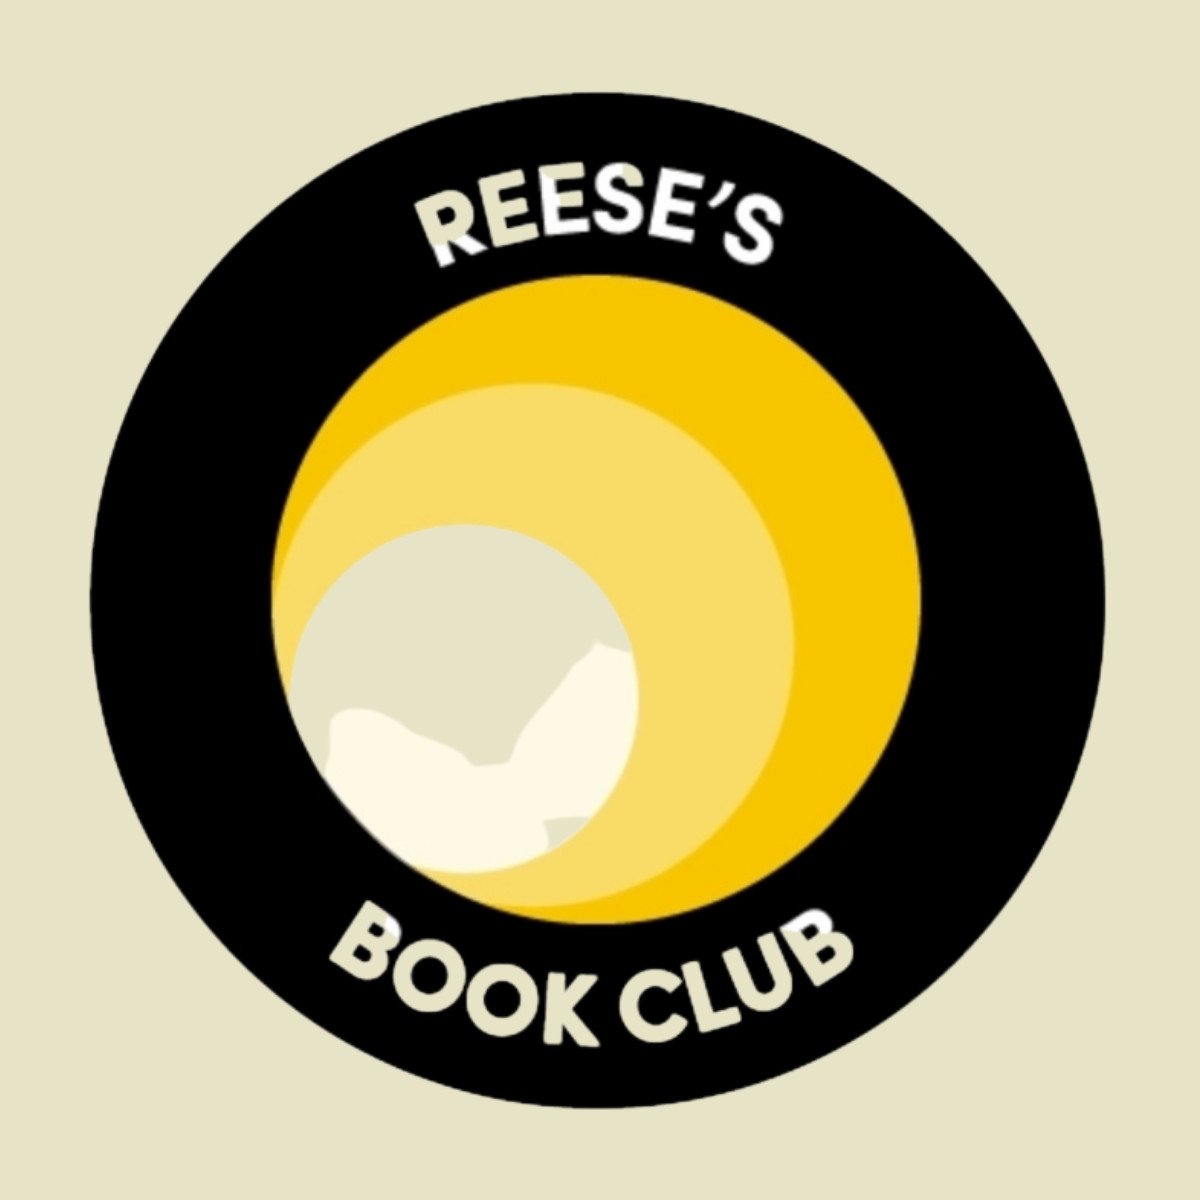 Full Reese Witherspoon Book Club List + PDF (Updated 2/24)